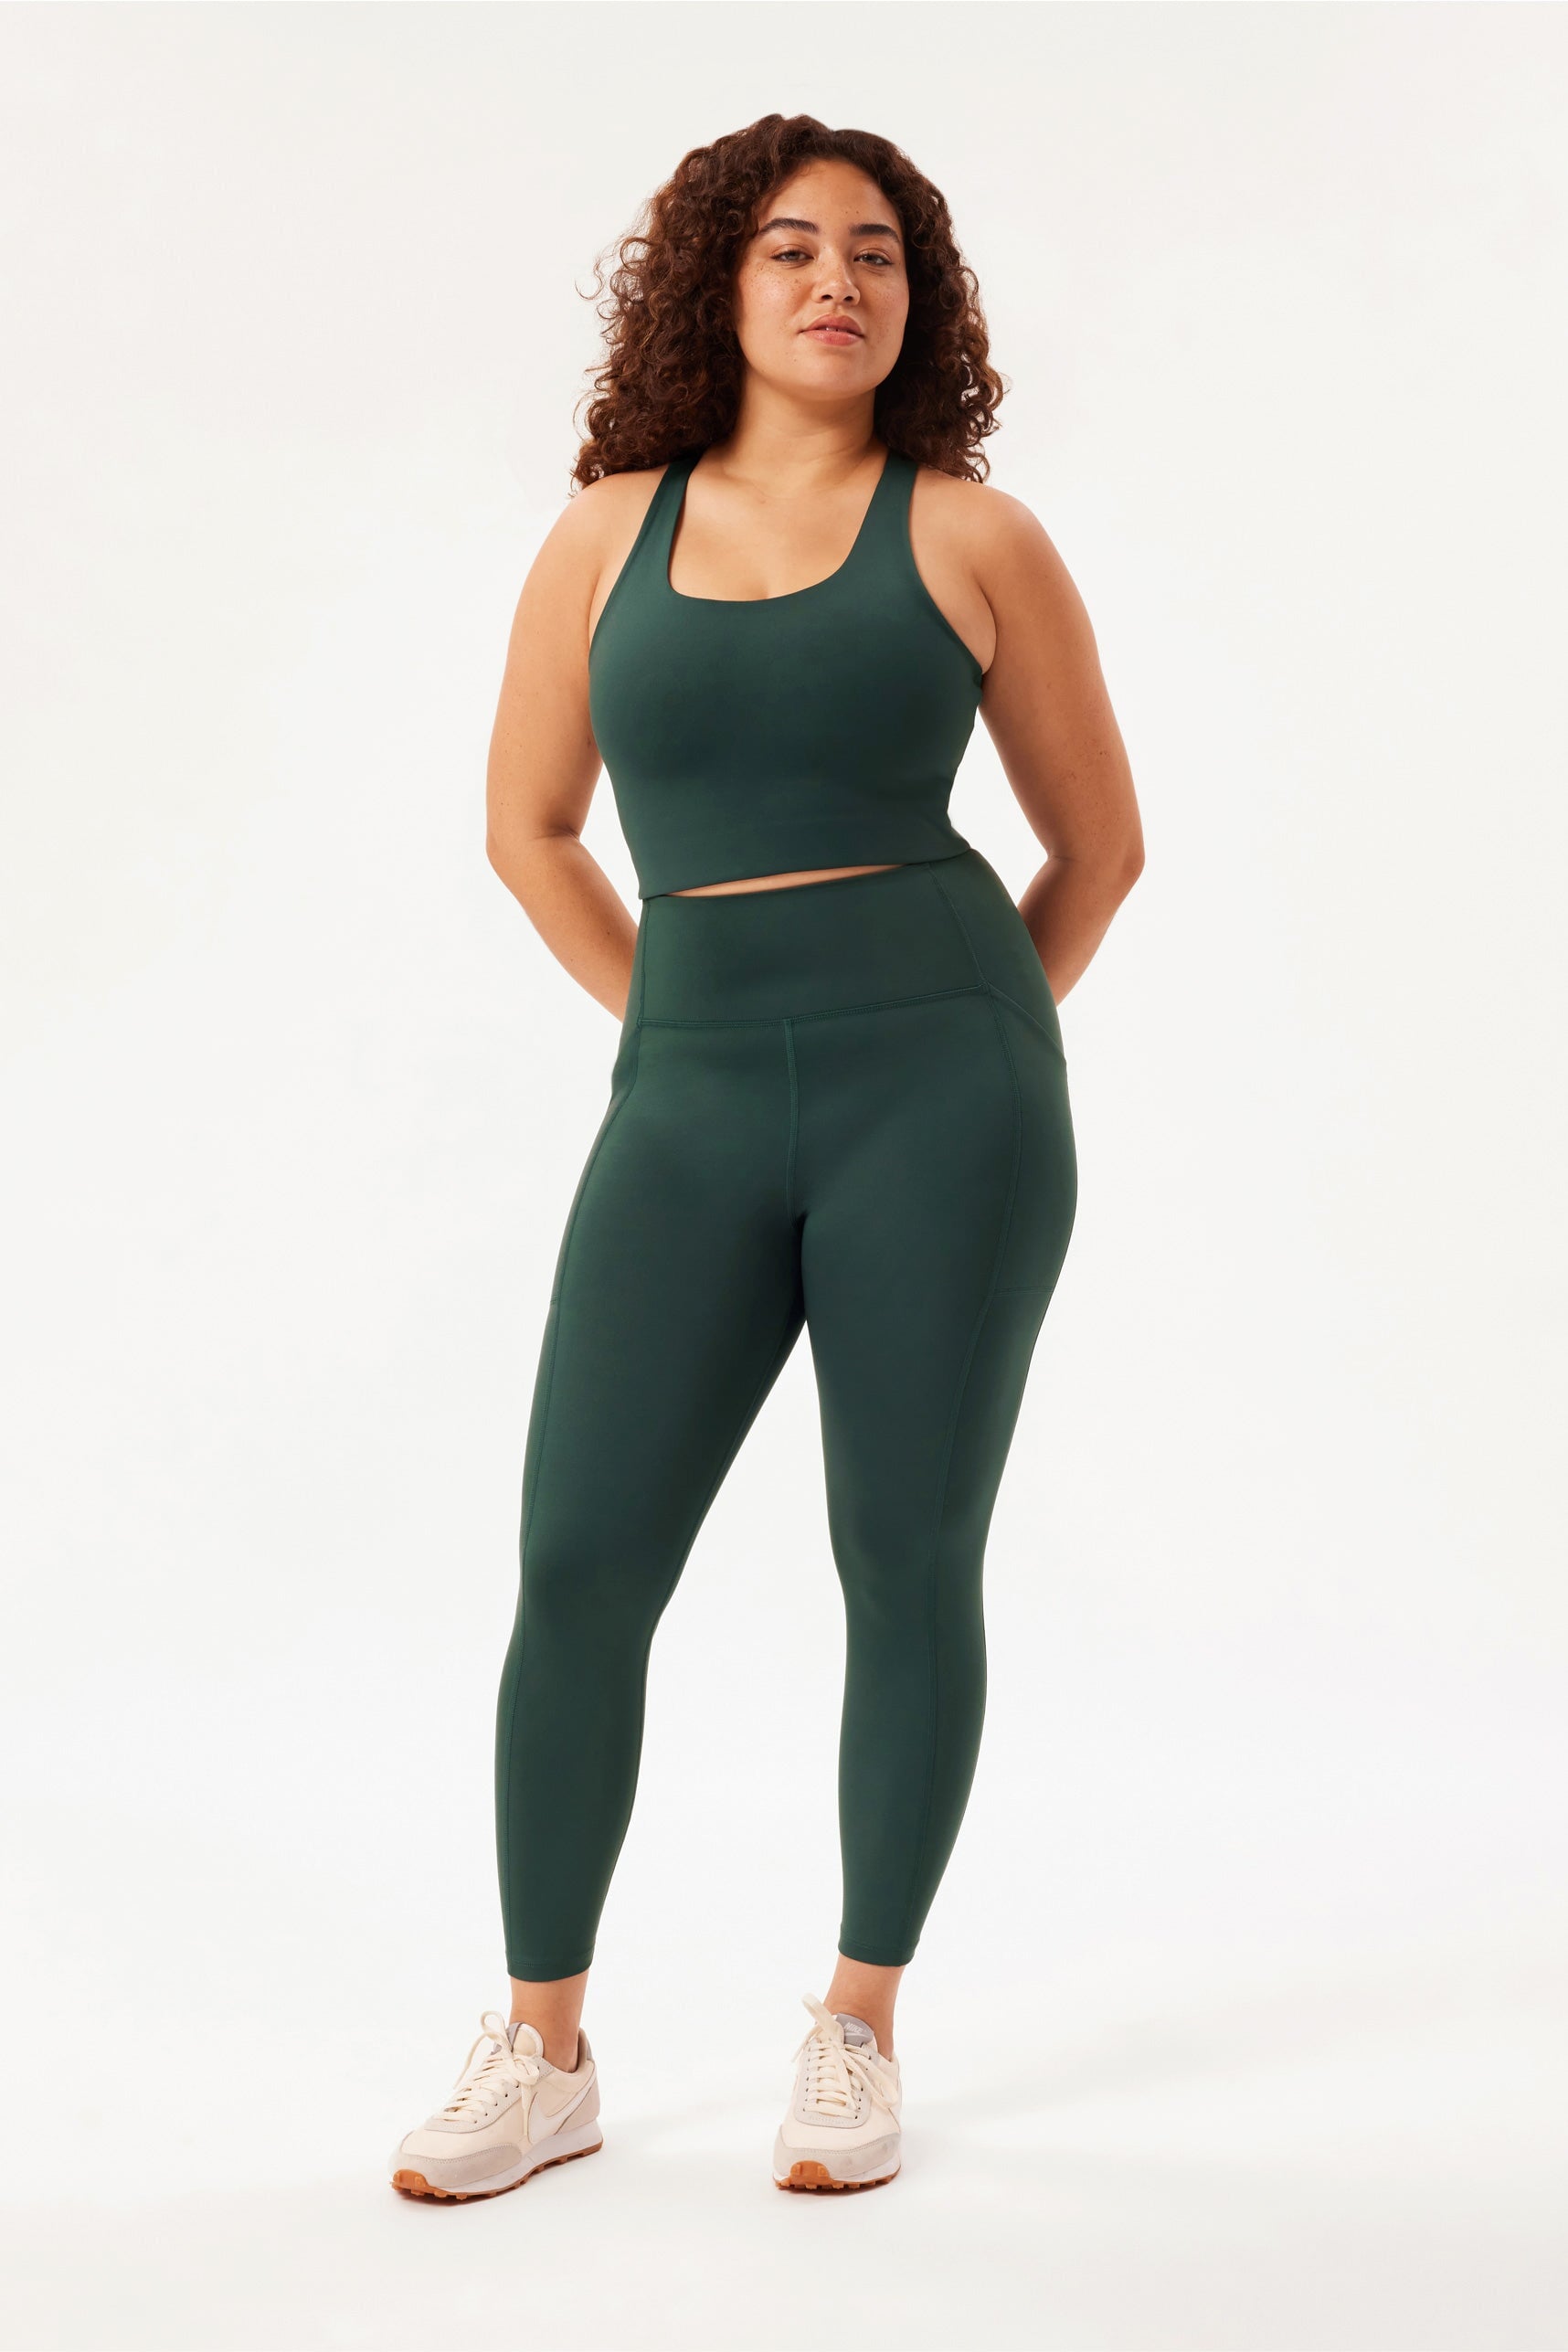  Plus Size Leggings for Women 4x-5x Who Pajamas Compression  Leggings for Women Leggings for Women Running Pack for Workout Brown Tights  for Women Ski Pants for Women Warehouse  Warehouse Deals 